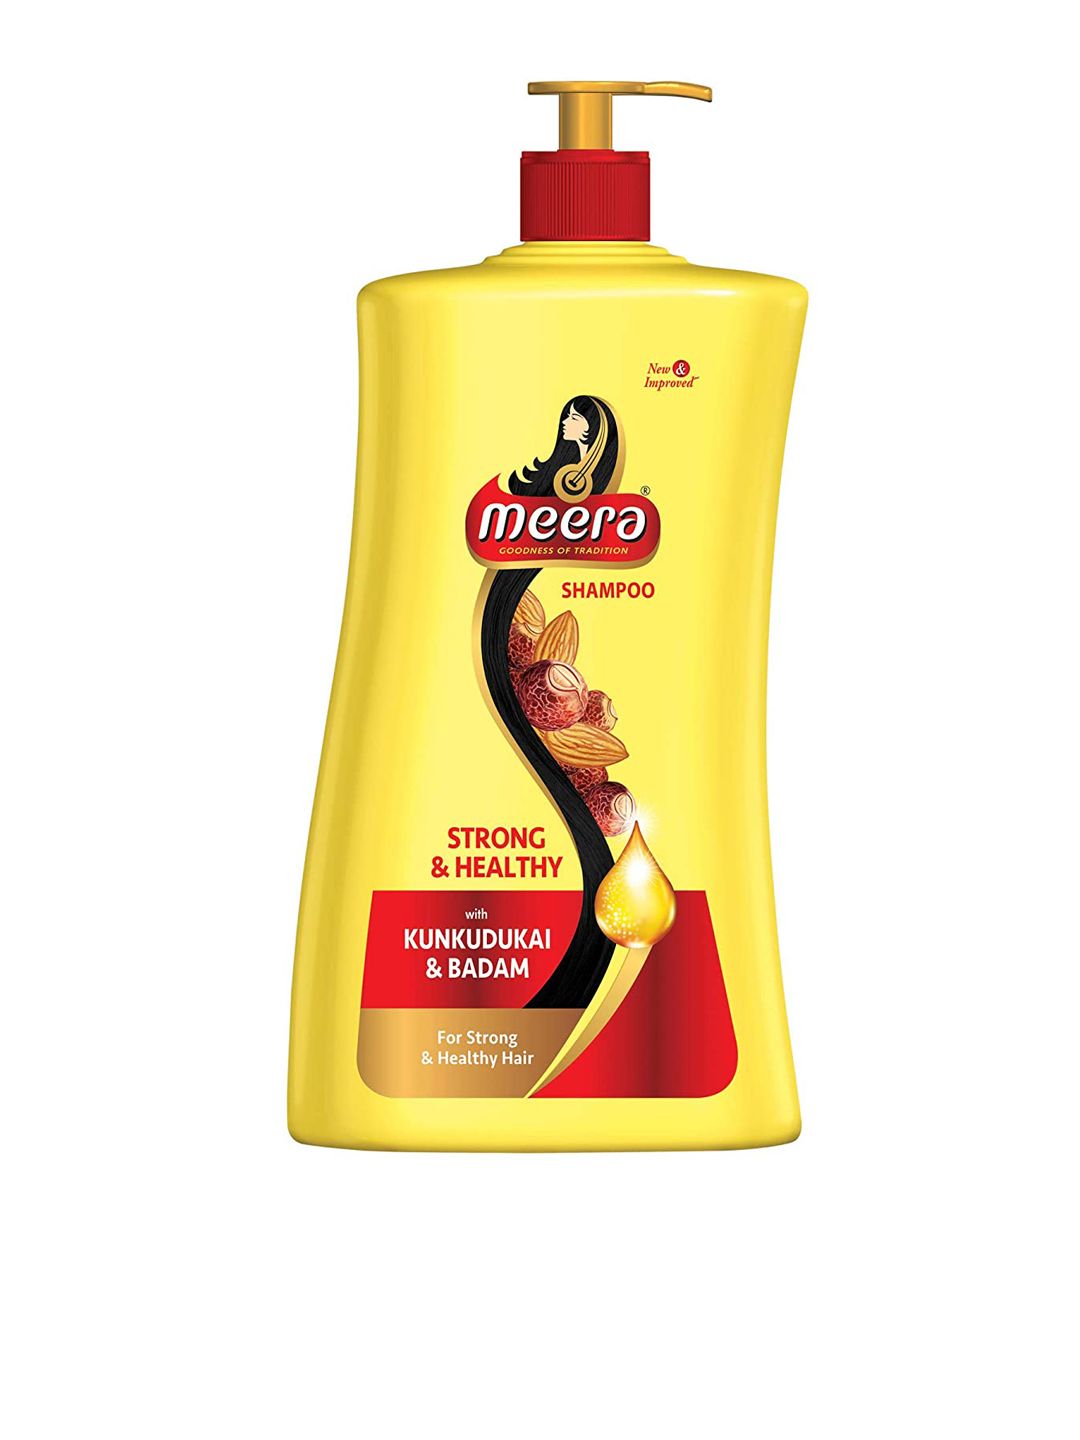 Meera GOODNESS OF TRADITION Strong & Healthy Shampoo, With Kunkudukai and Badam- 1L Price in India